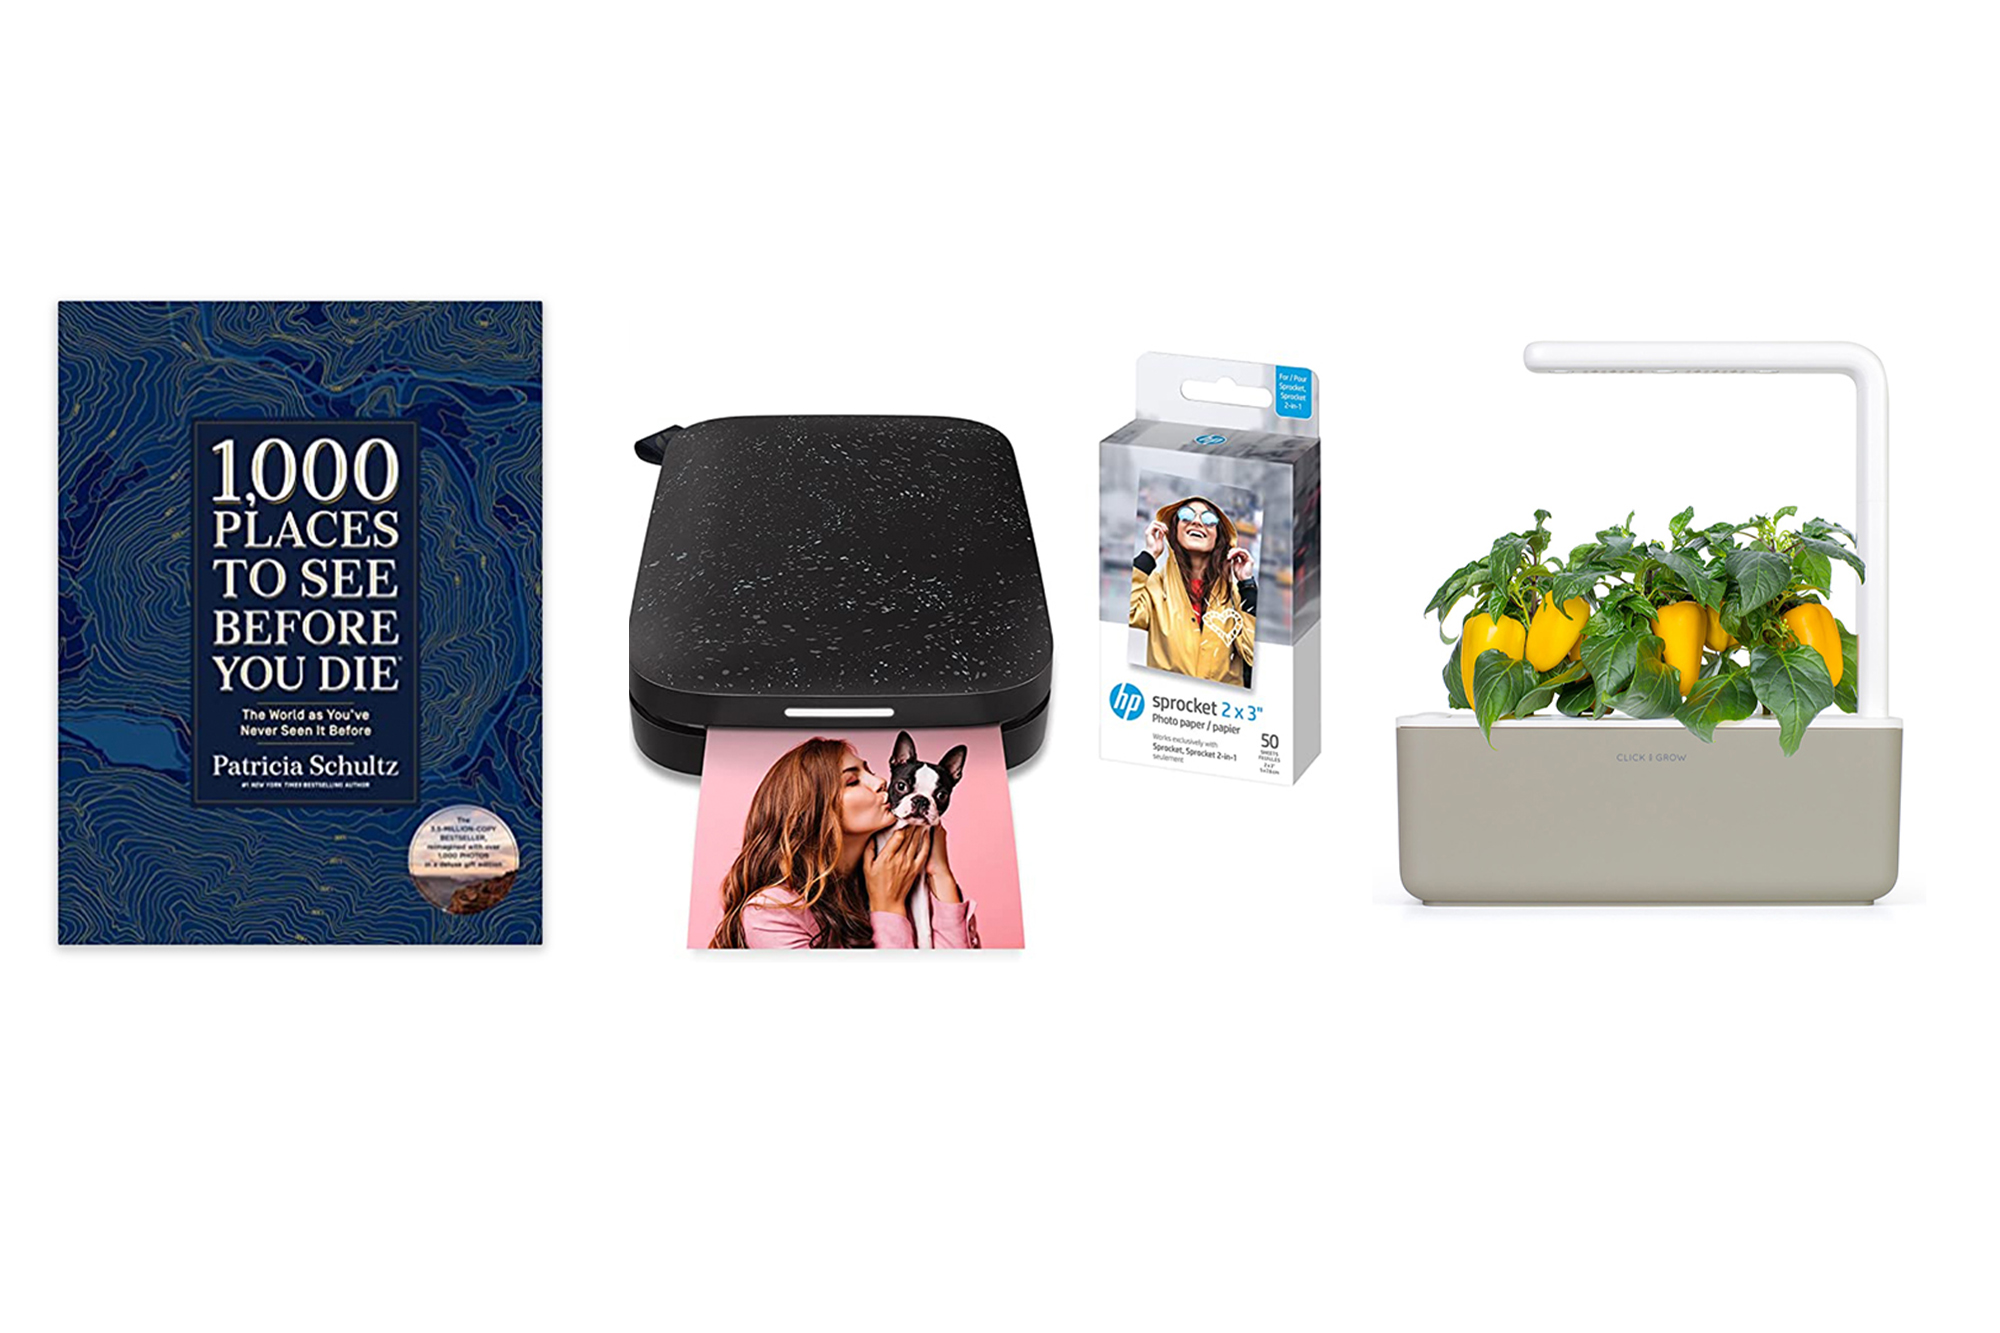 The 23 Best Gifts for the Boyfriend Who Doesn't Want Anything